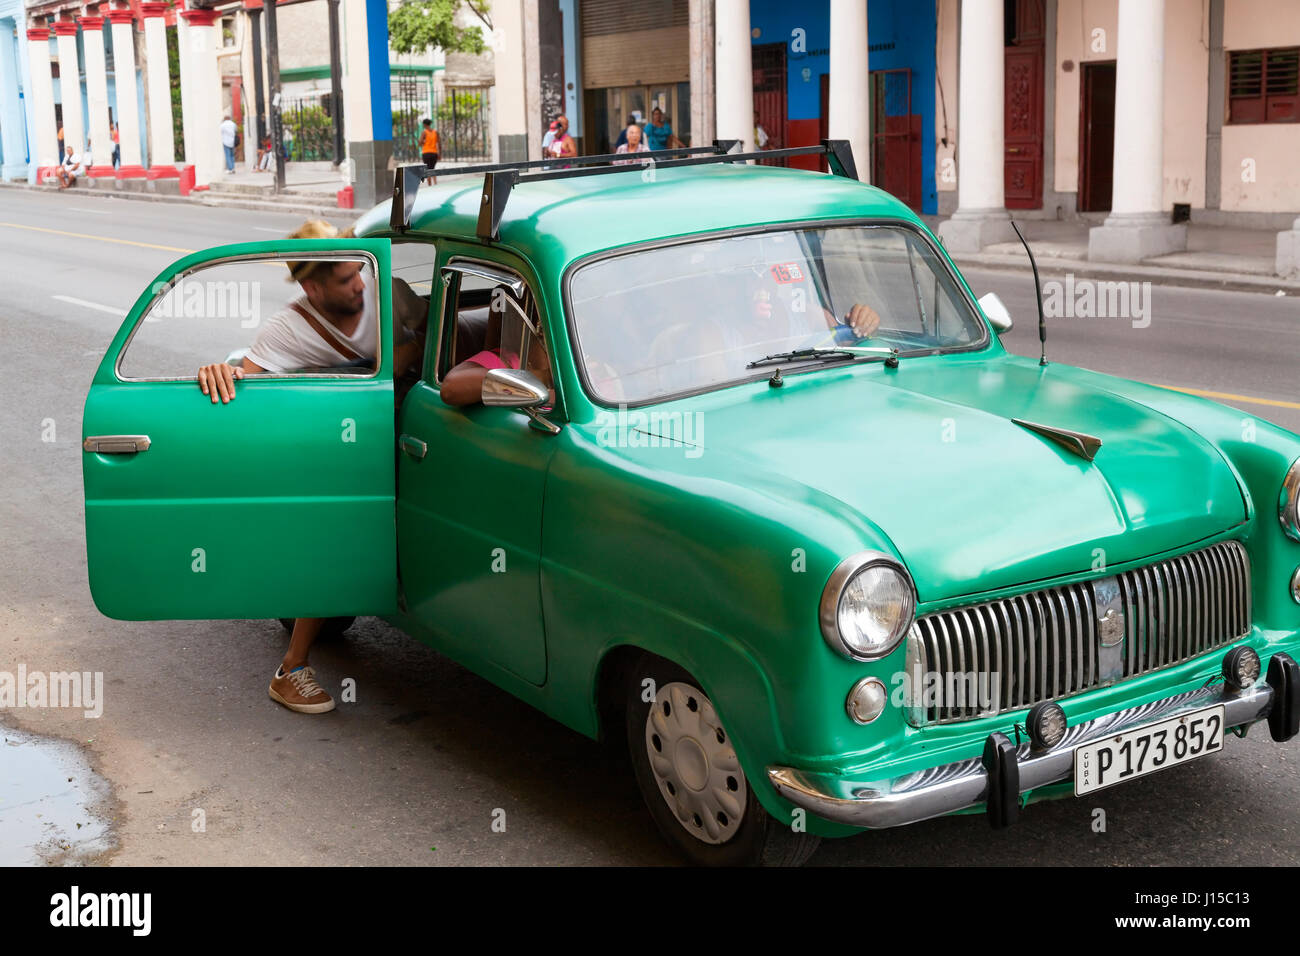 A person getting into a taxi colectivo or shared taxi in Havana, Cuba. Stock Photo